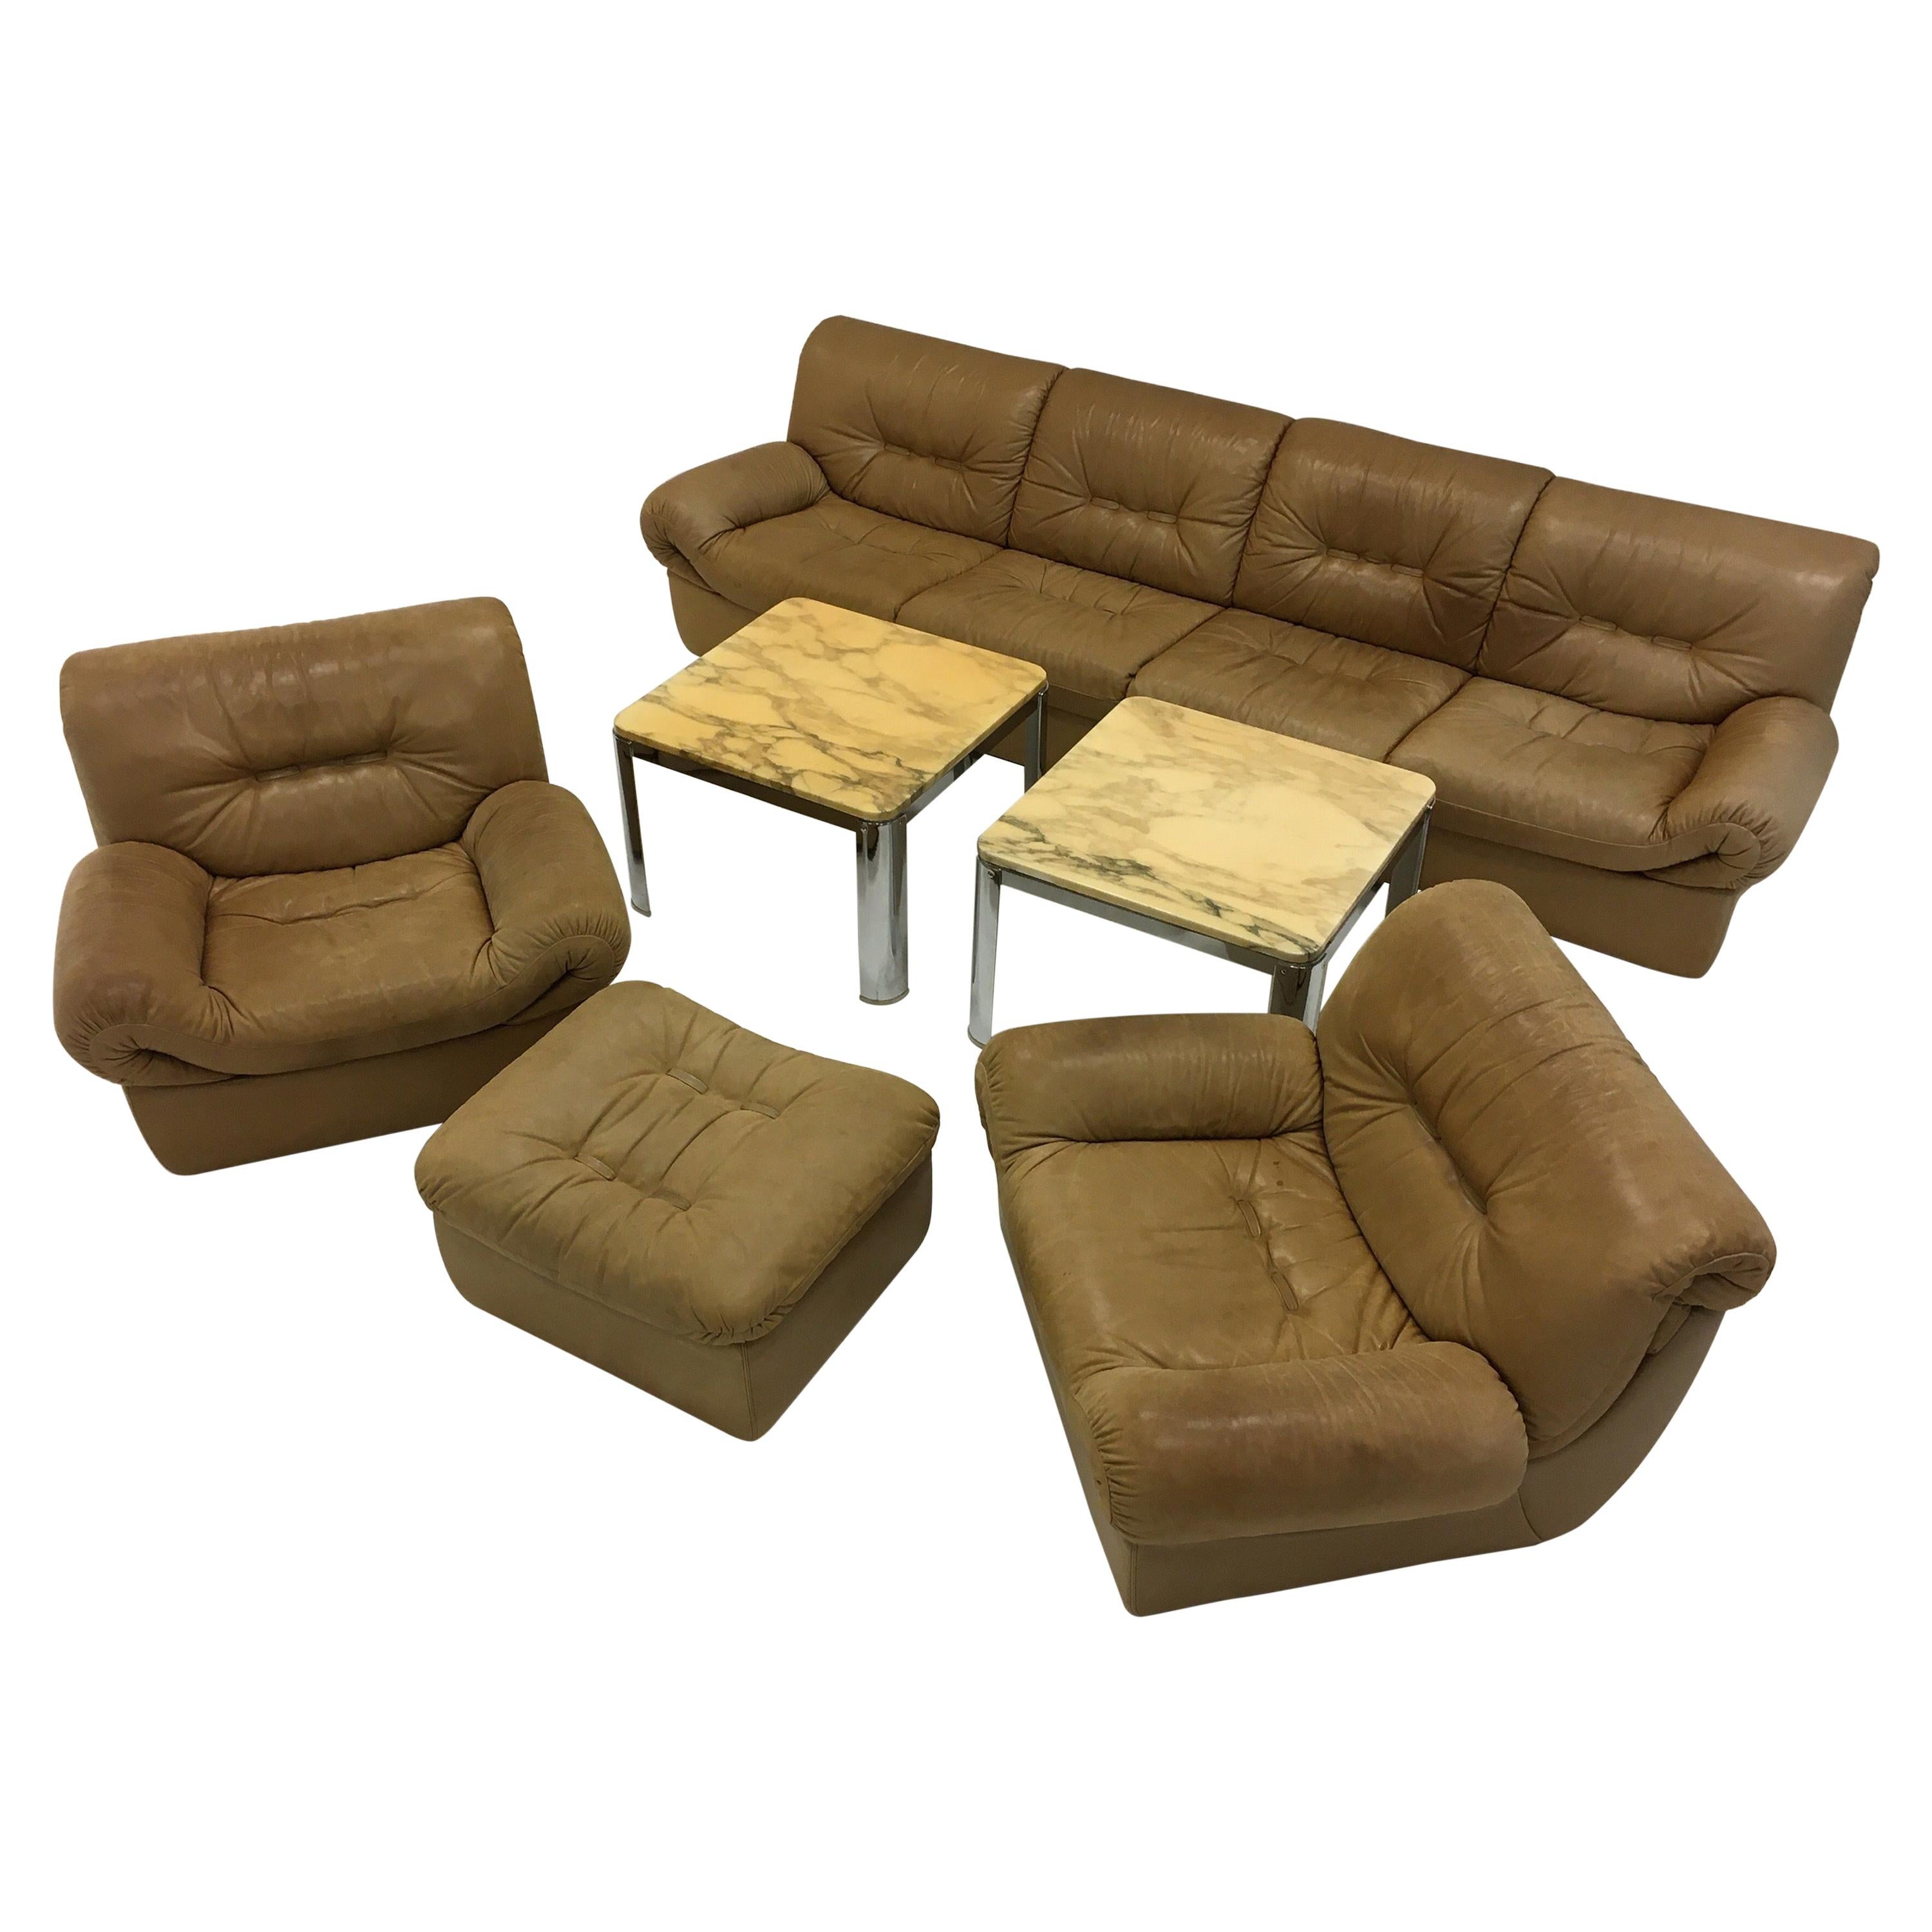 Wittmann, Model 'Chairman' Sofa Suite Living Room Set, Patinated Leather, 1971